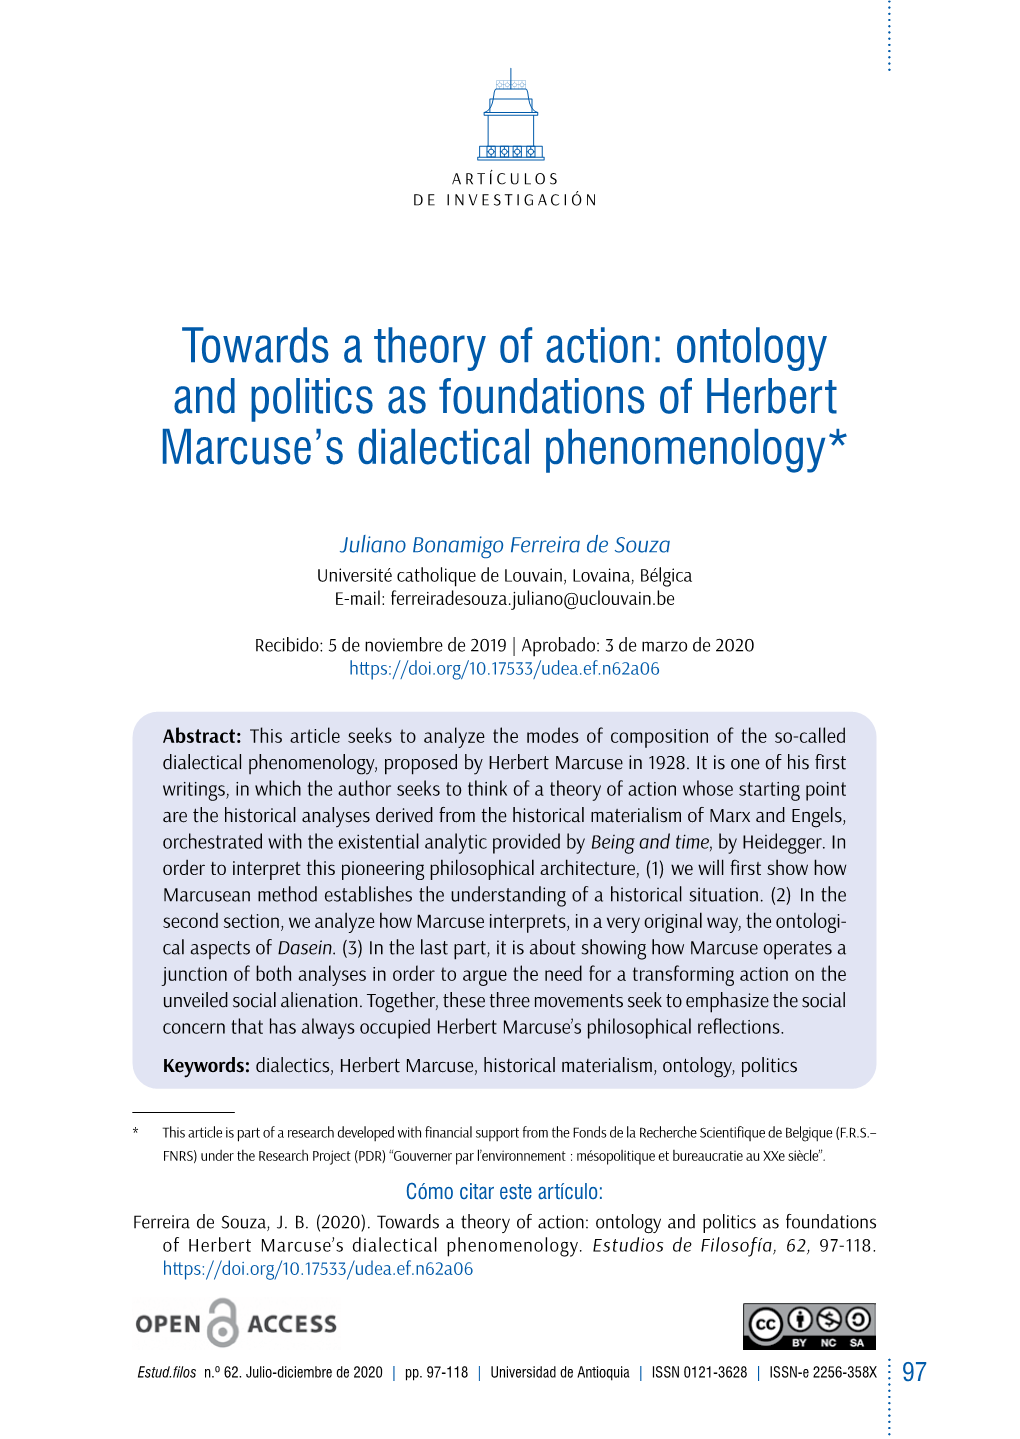 Ontology and Politics As Foundations of Herbert Marcuse's Dialectical